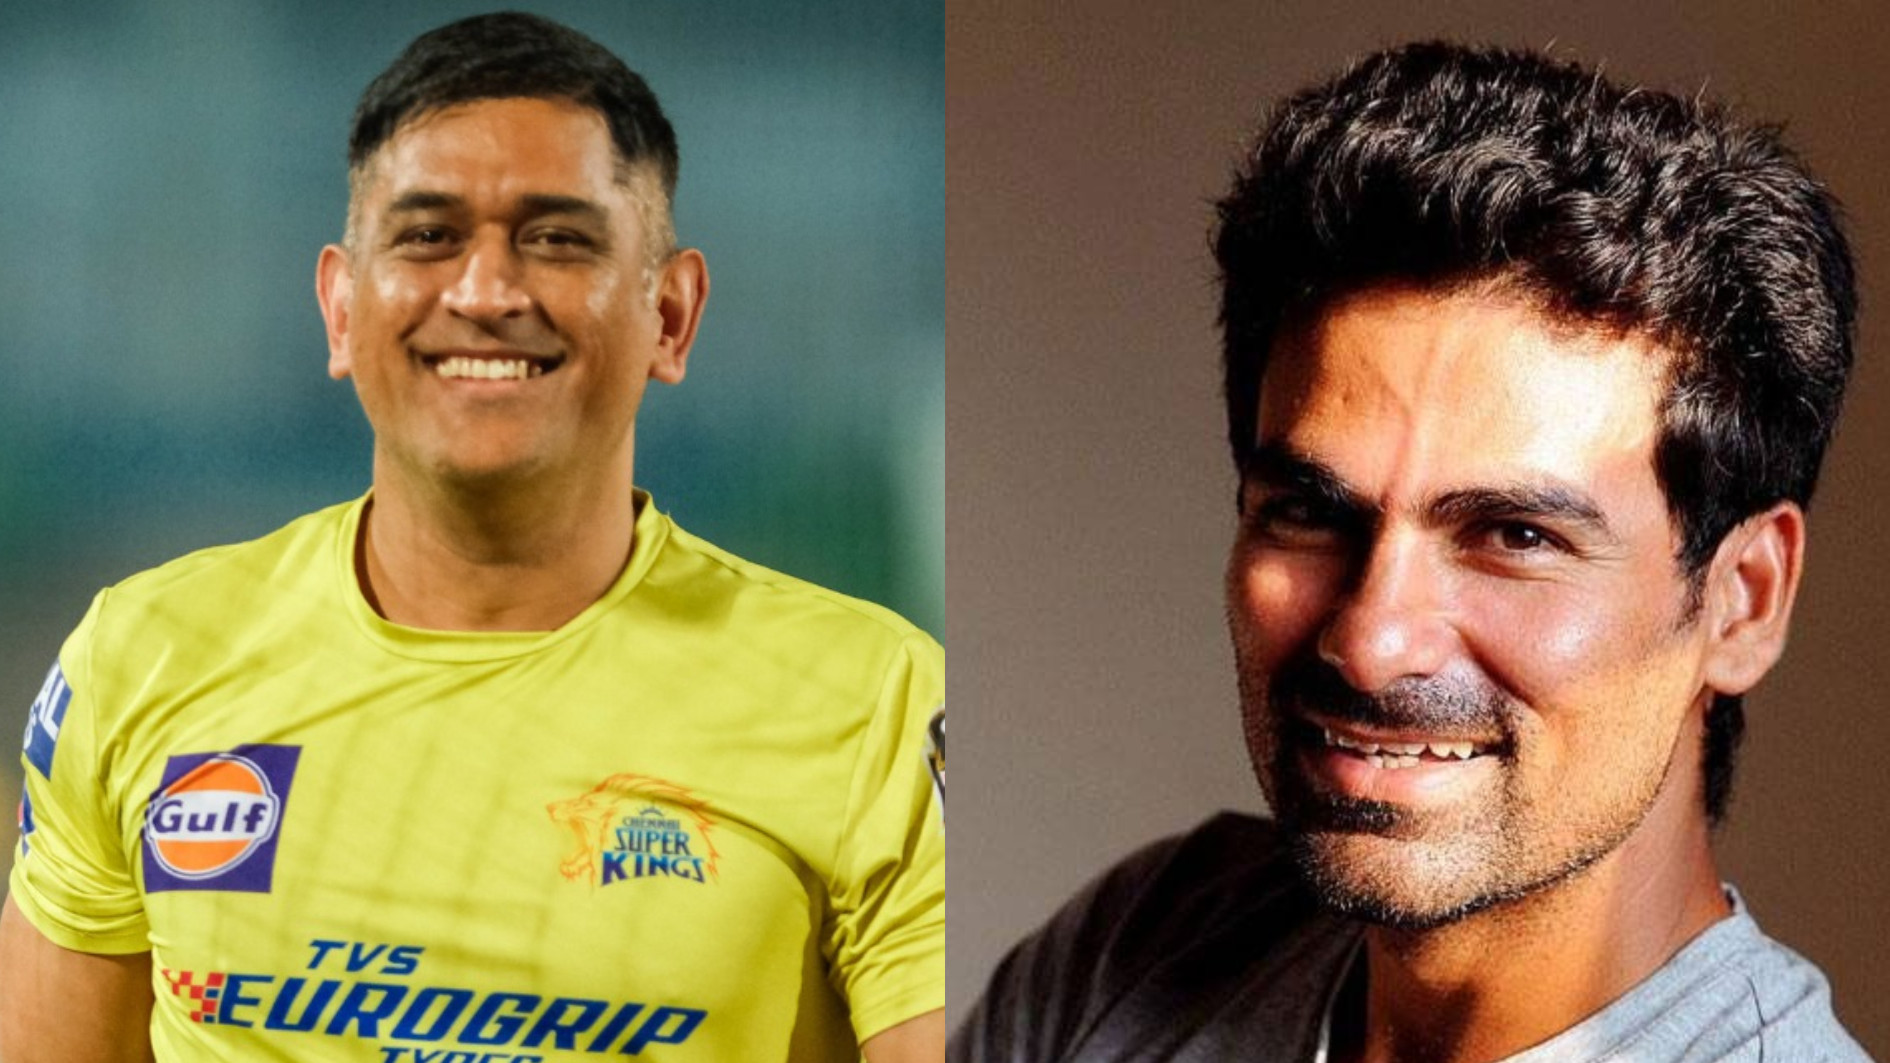 IPL 2022: “MS Dhoni is not finished, he is the finisher”- Mohammad Kaif predicts Dhoni’s future in IPL